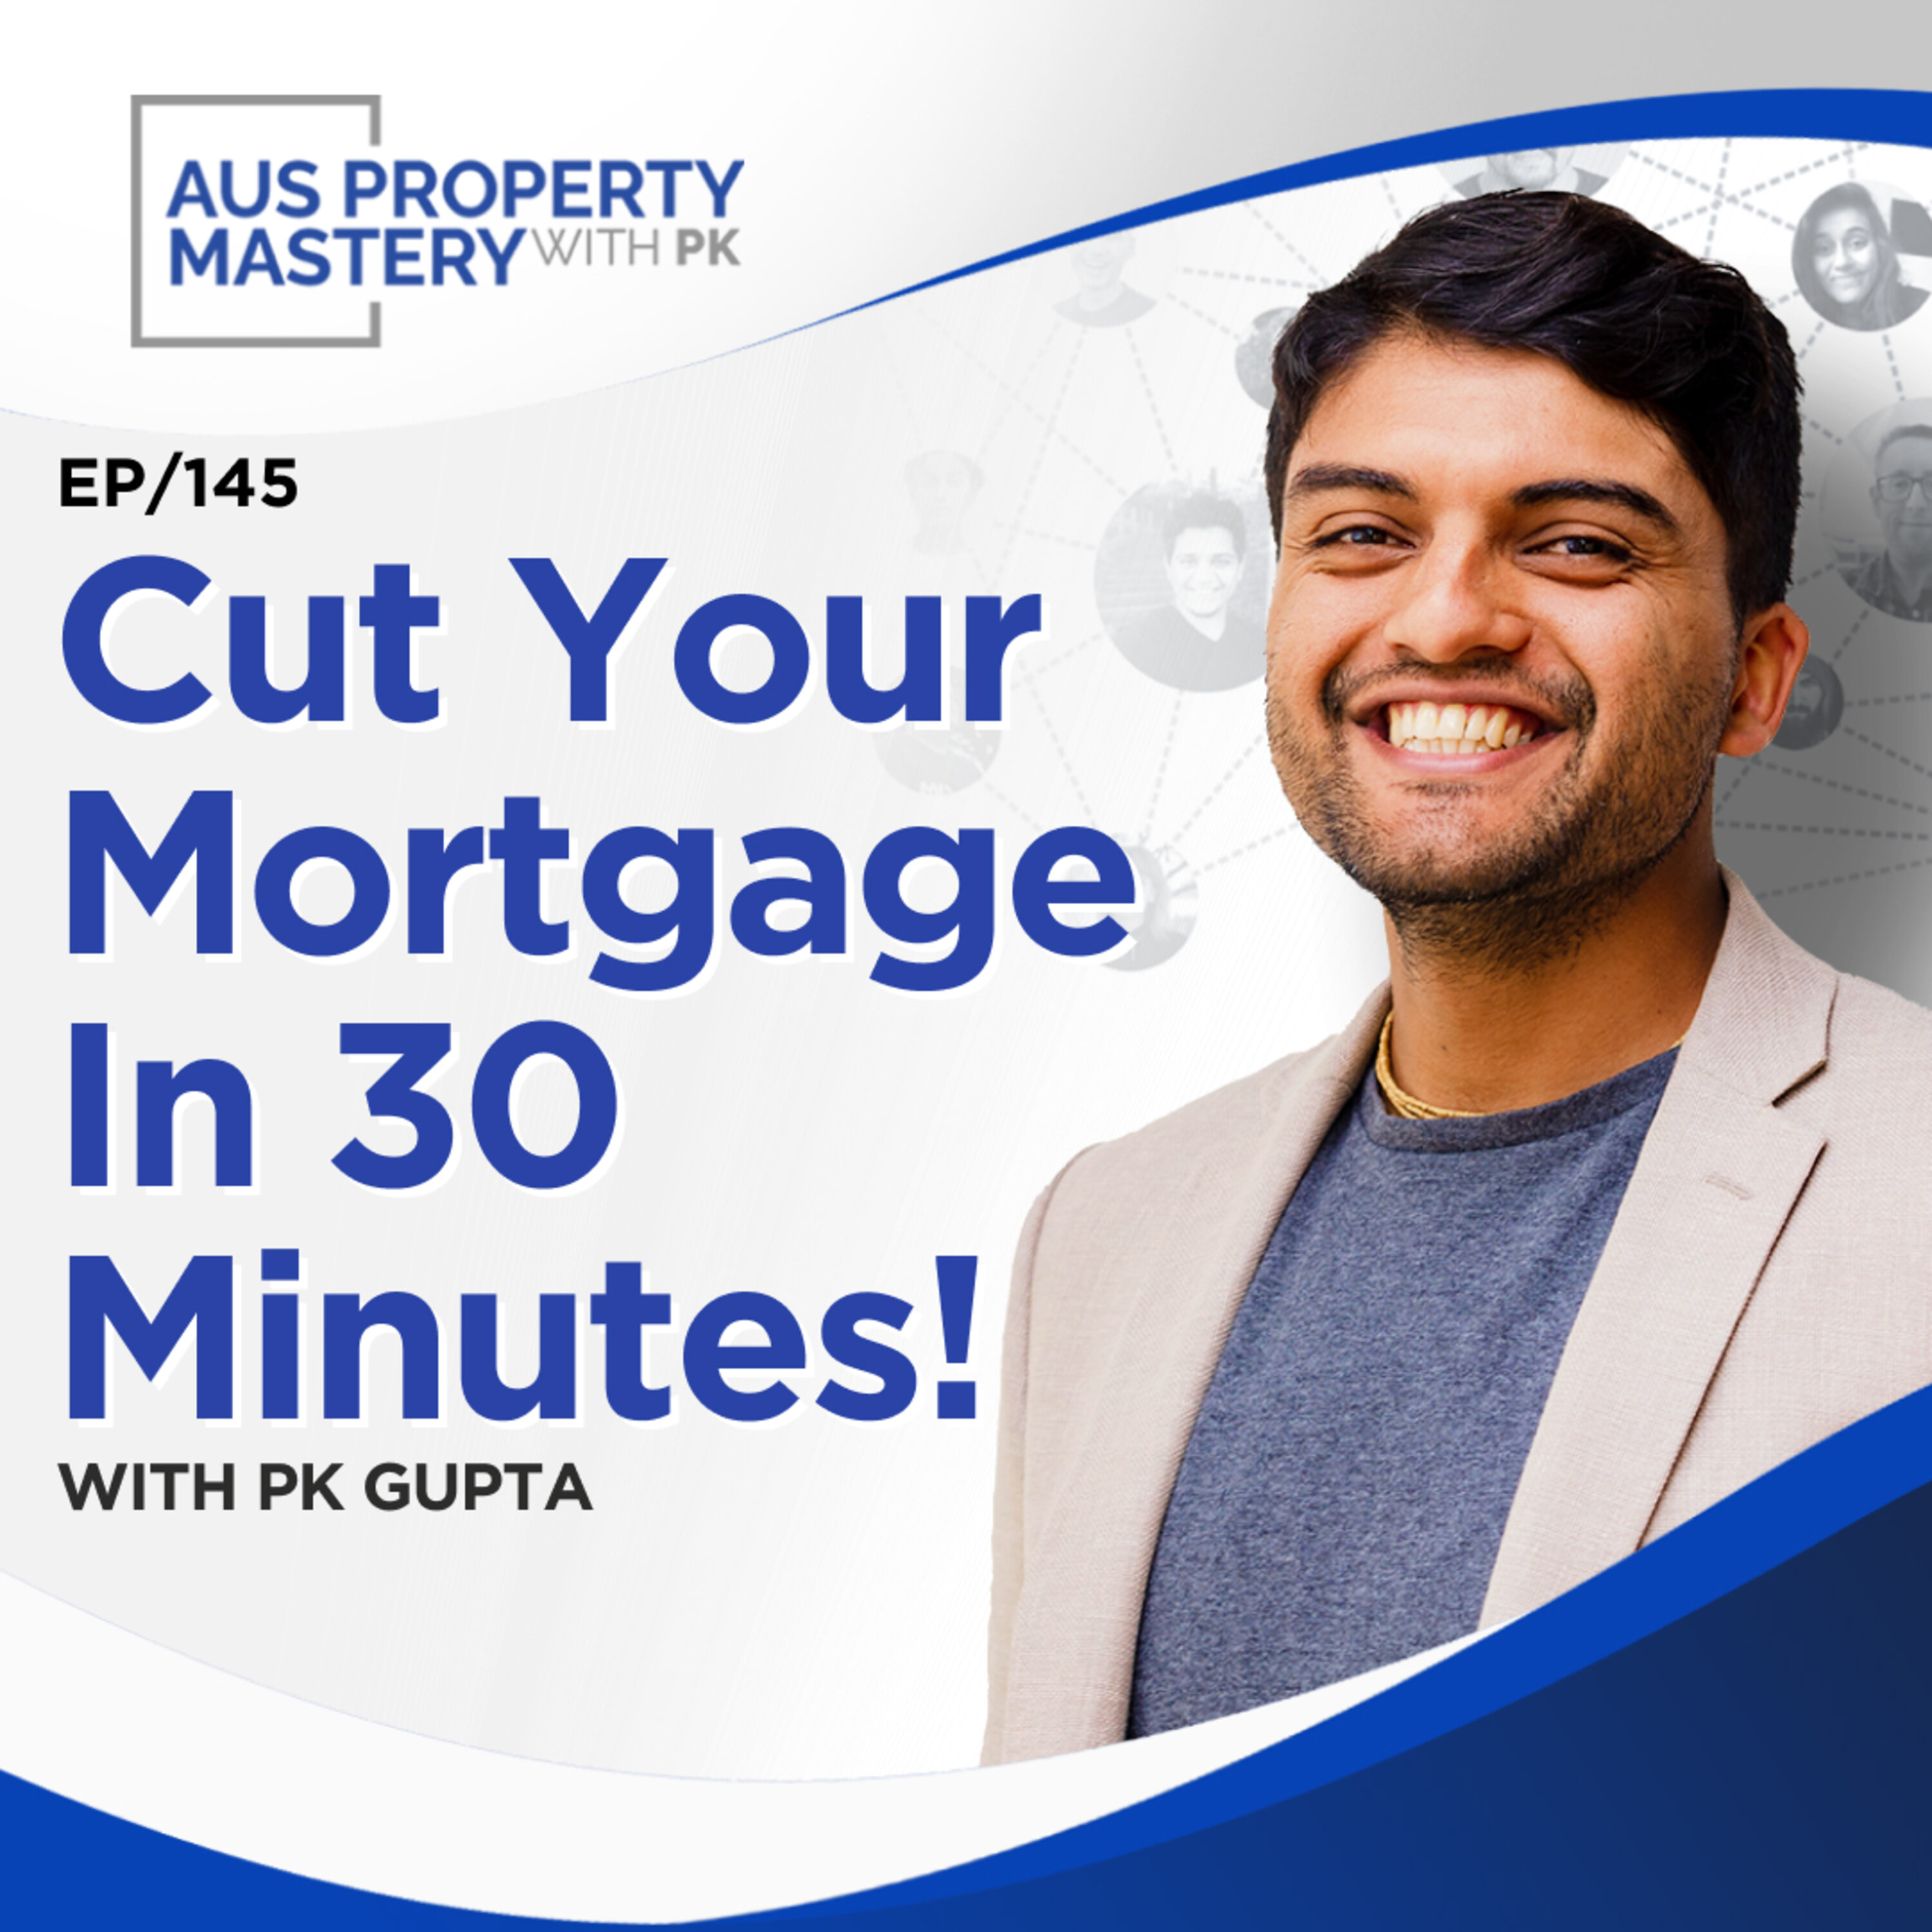 Cut Your Mortgage In 30 Minutes!